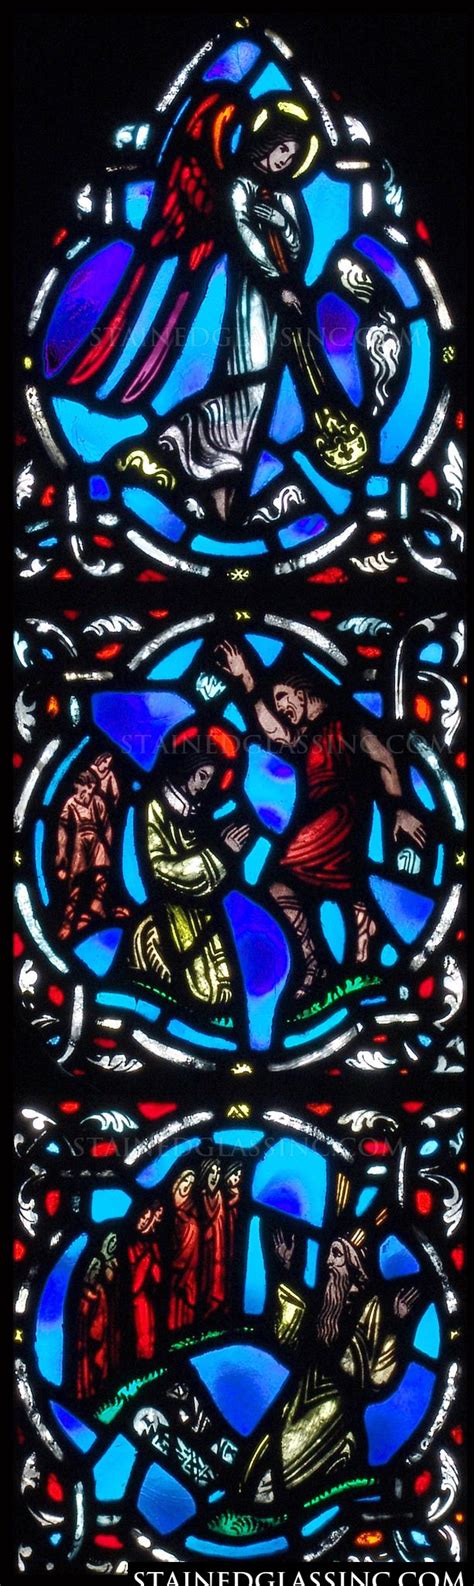 Images Of Christian Faith Religious Stained Glass Window